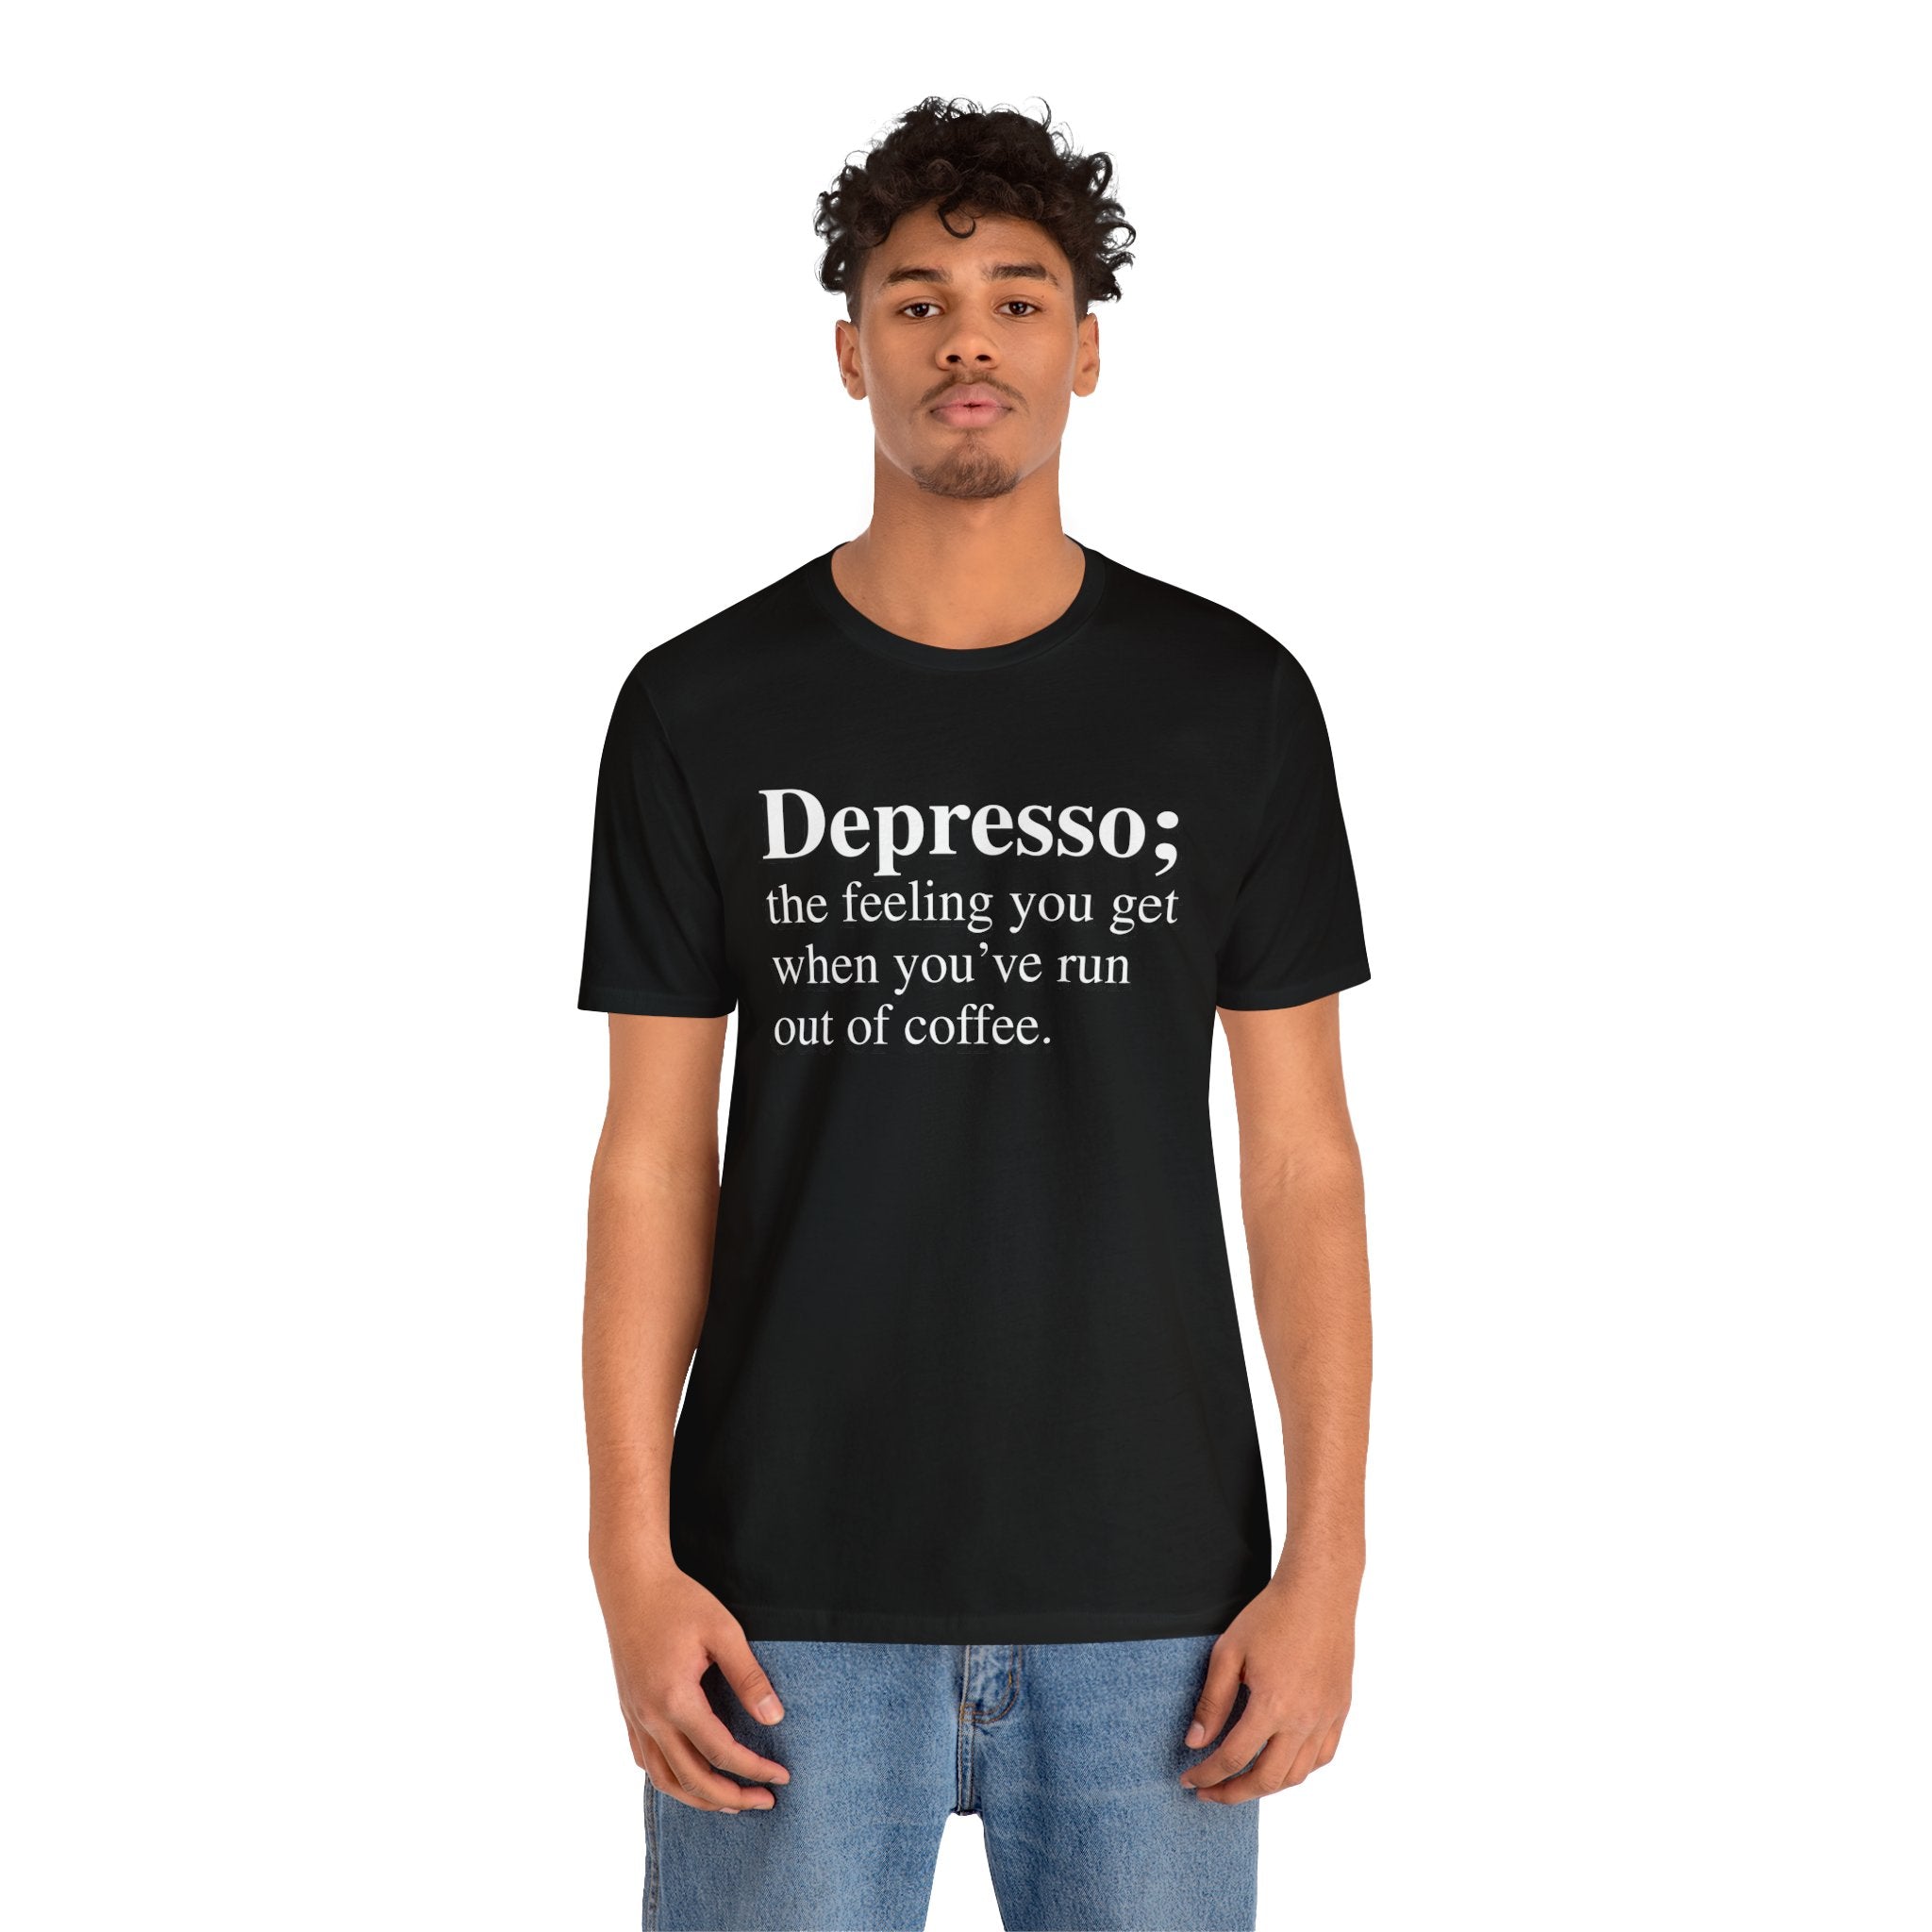 A young man is wearing a soft cotton, black Depresso T-Shirt with the text "Depresso; the feeling you get when you've run out of coffee," and he stands facing the